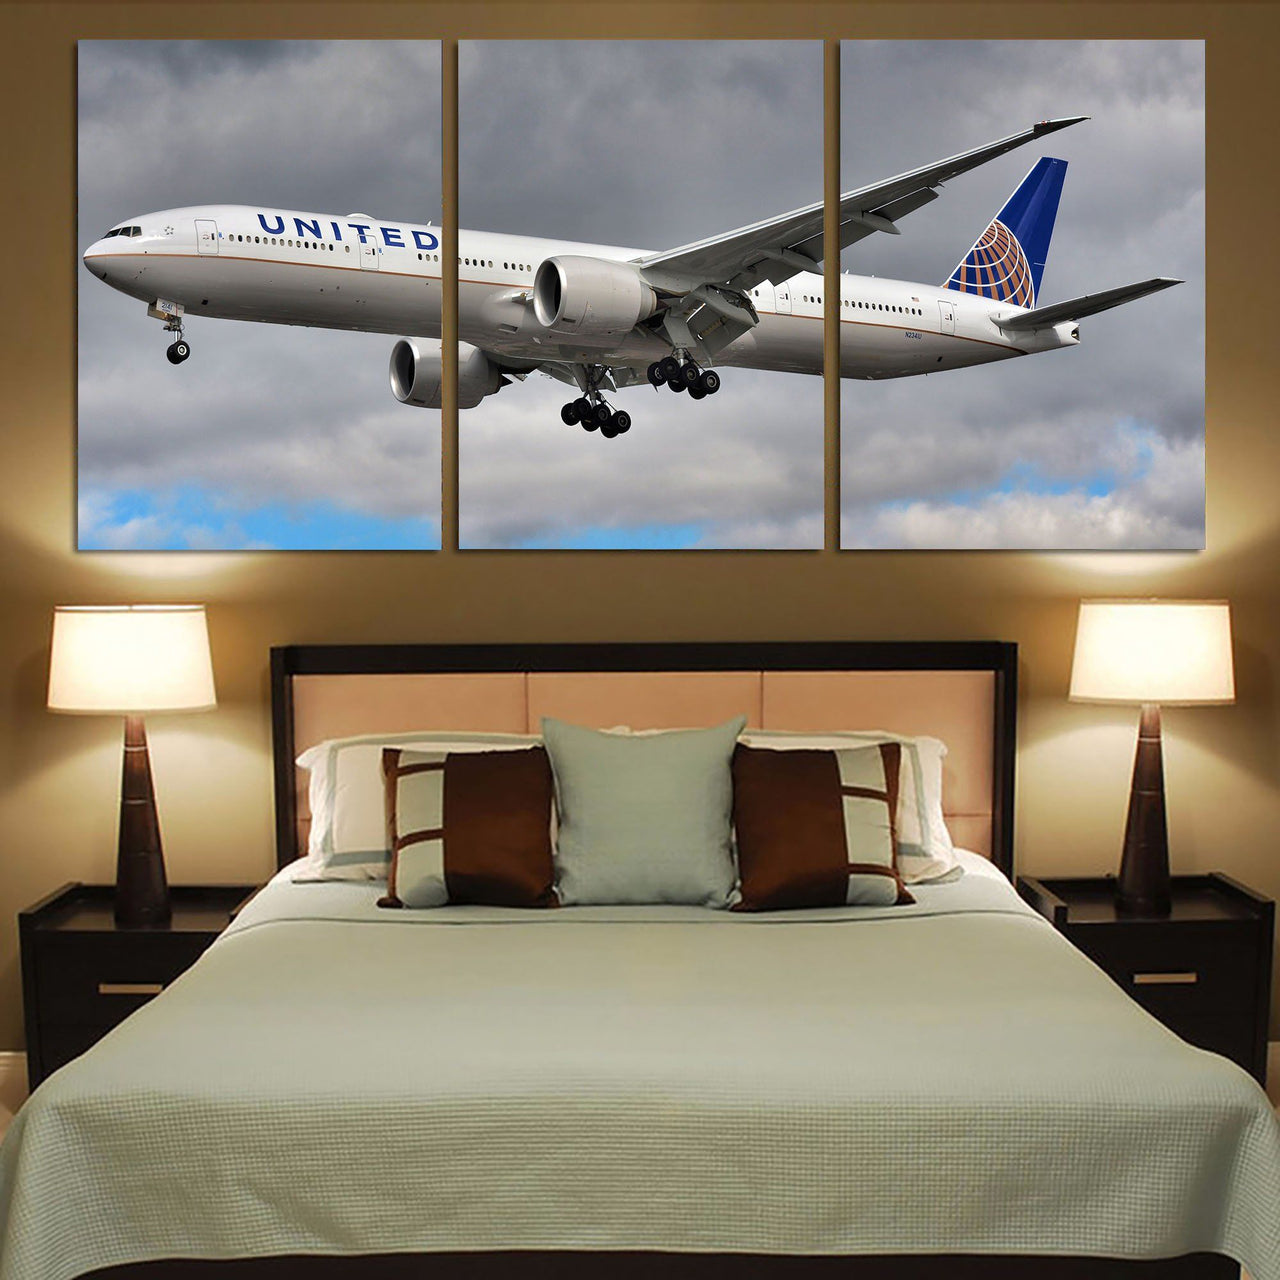 United Airways Boeing 777 Printed Canvas Posters (3 Pieces) Aviation Shop 